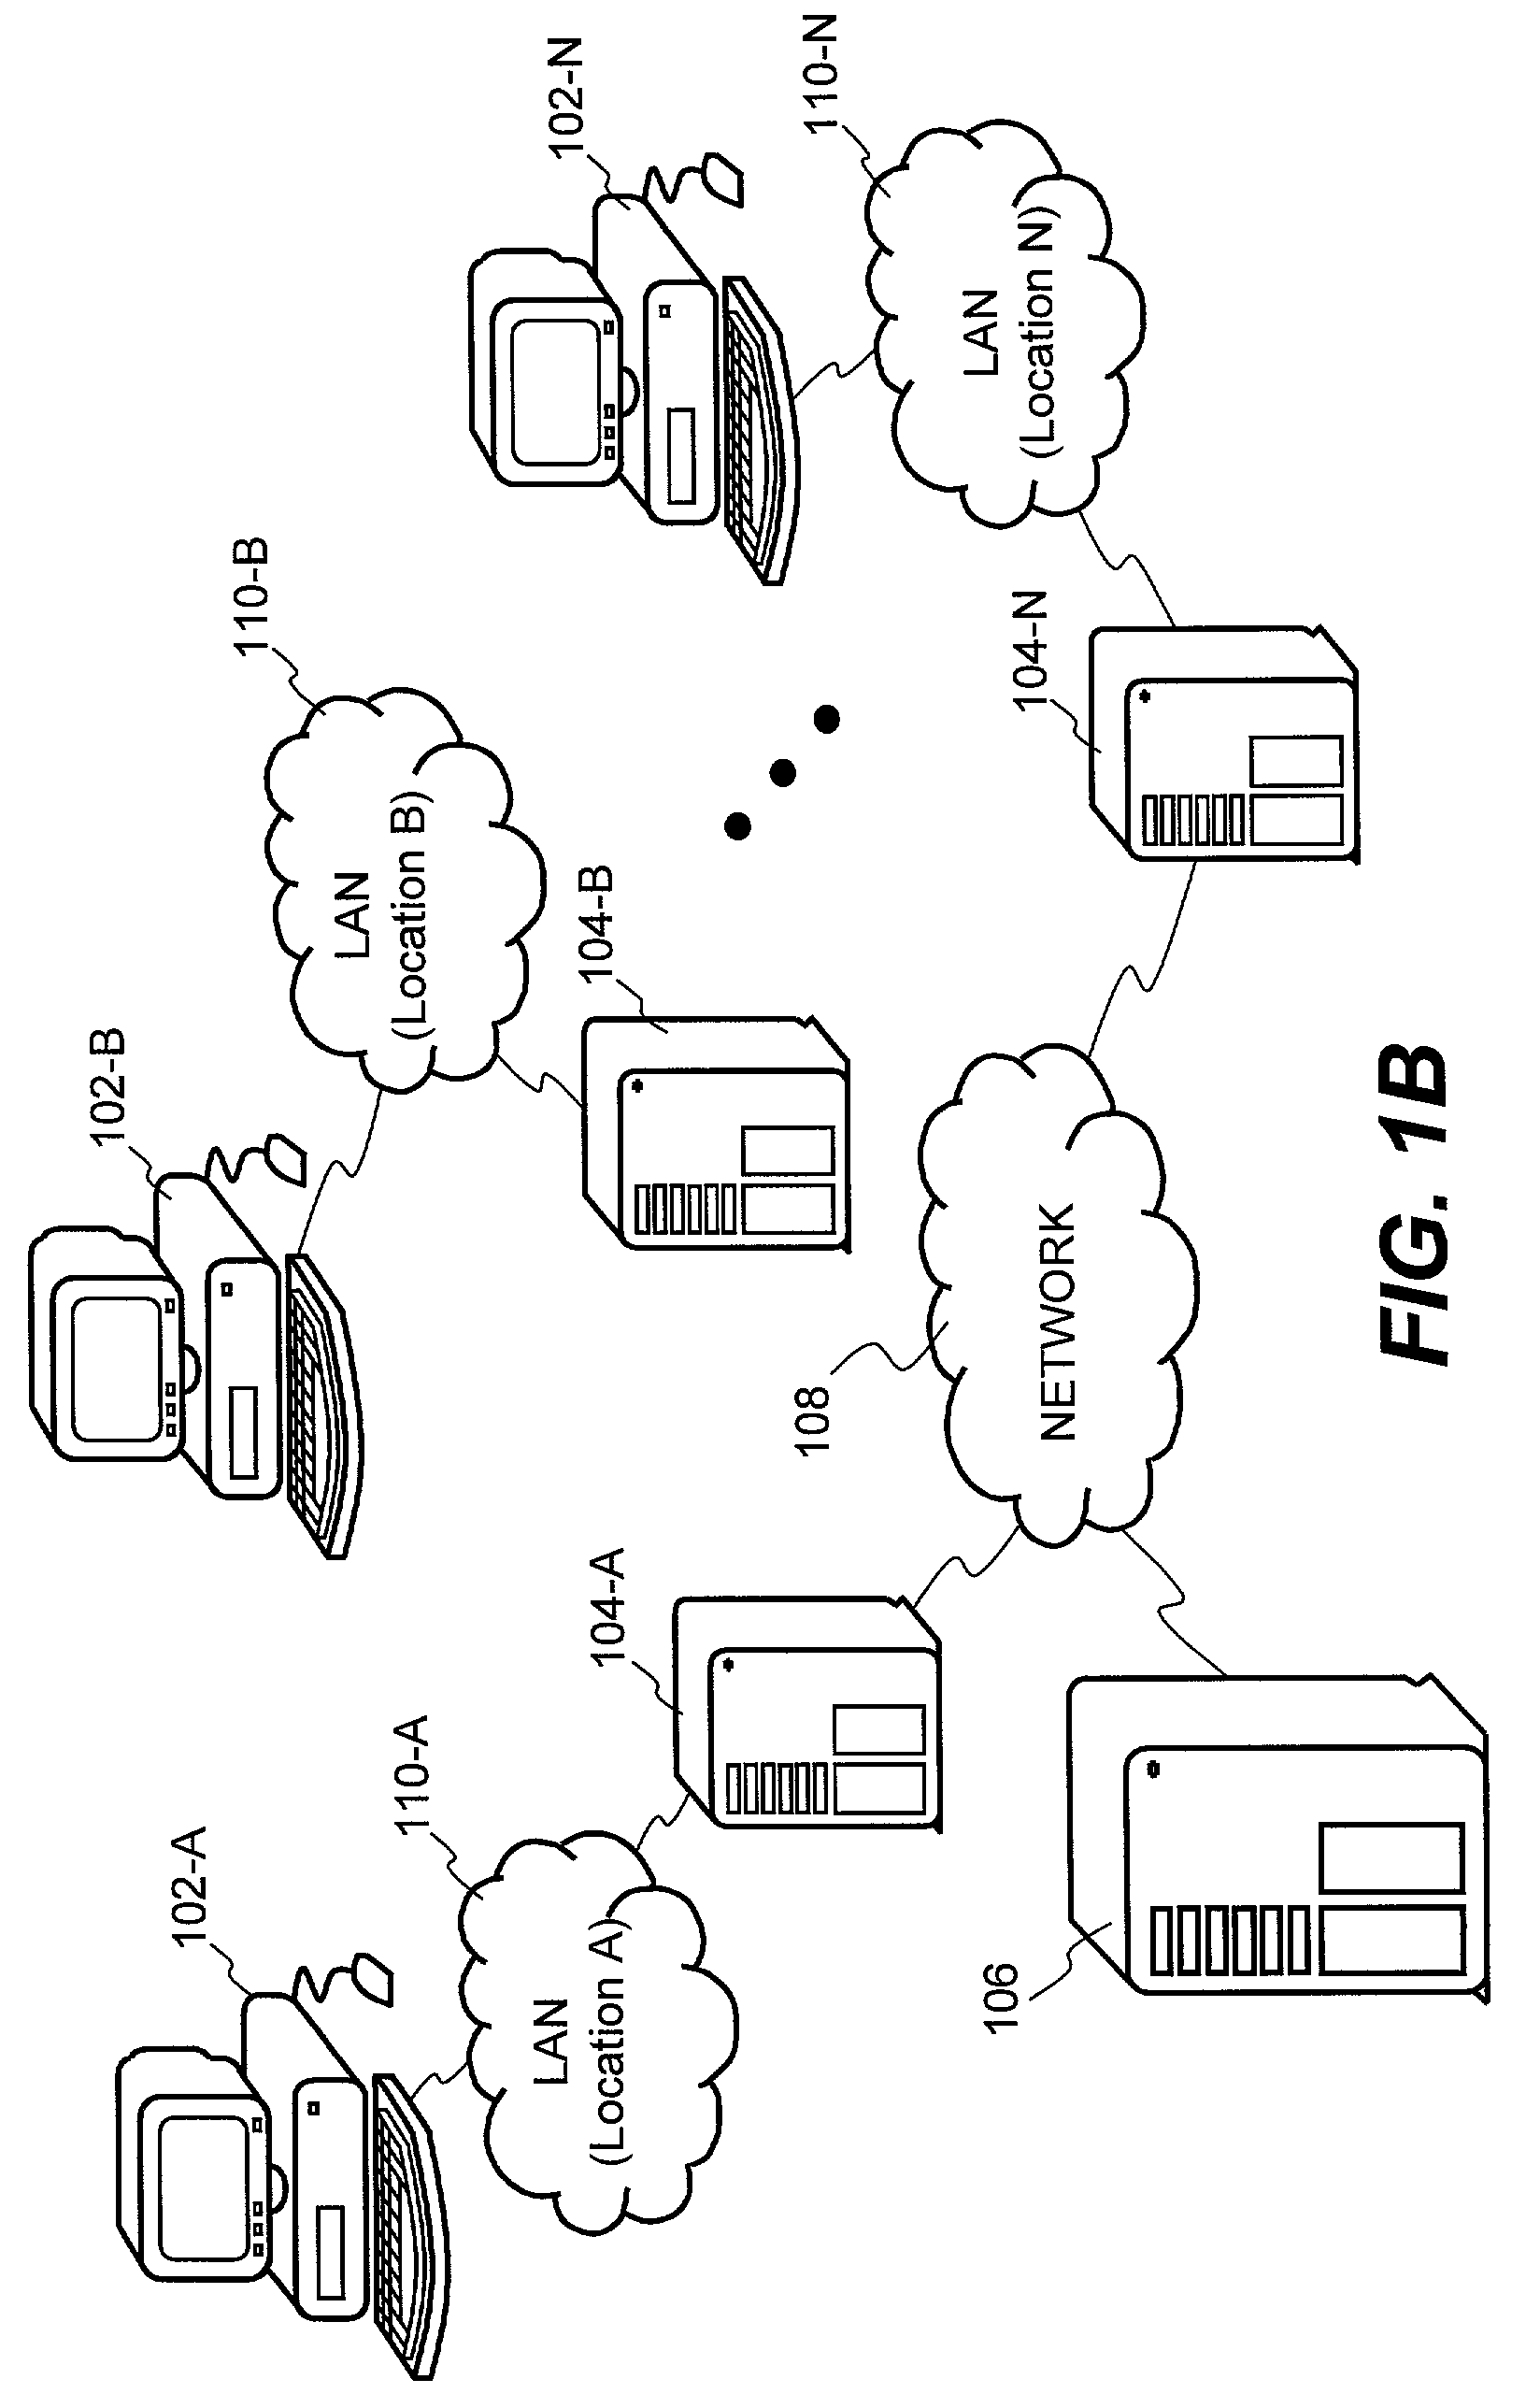 System and method for providing distributed access control to secured documents